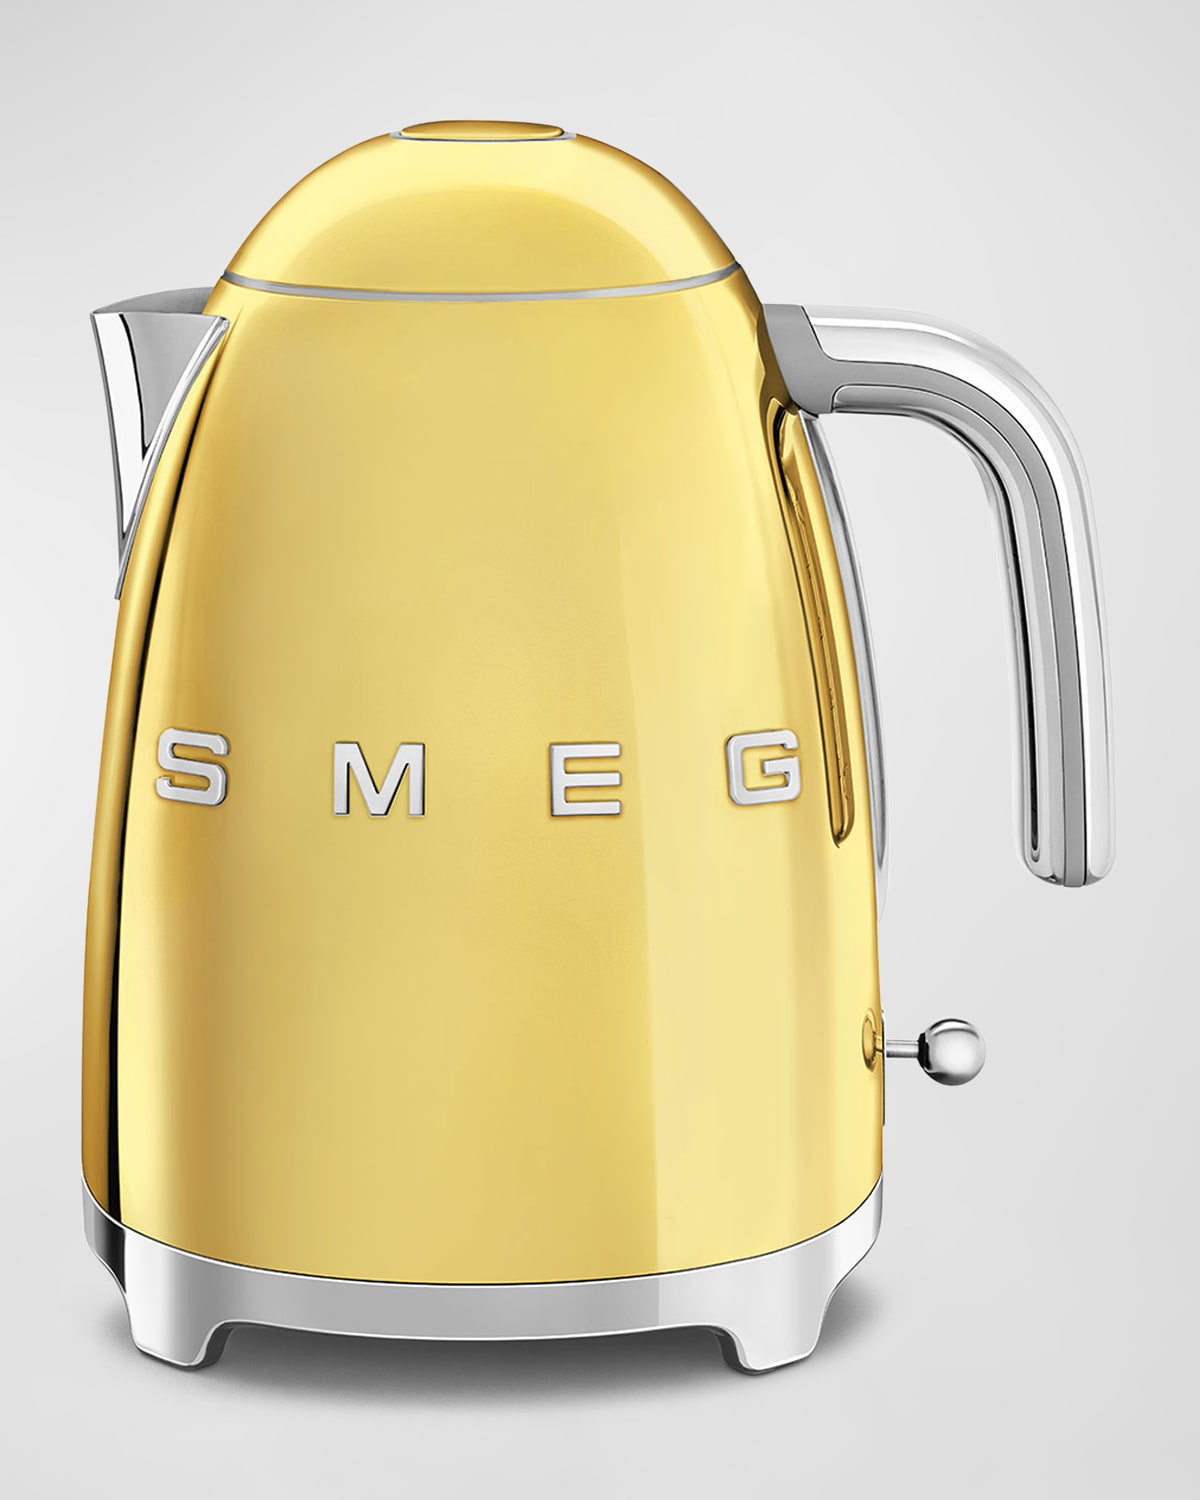 Smeg Electric Kettle In Gold